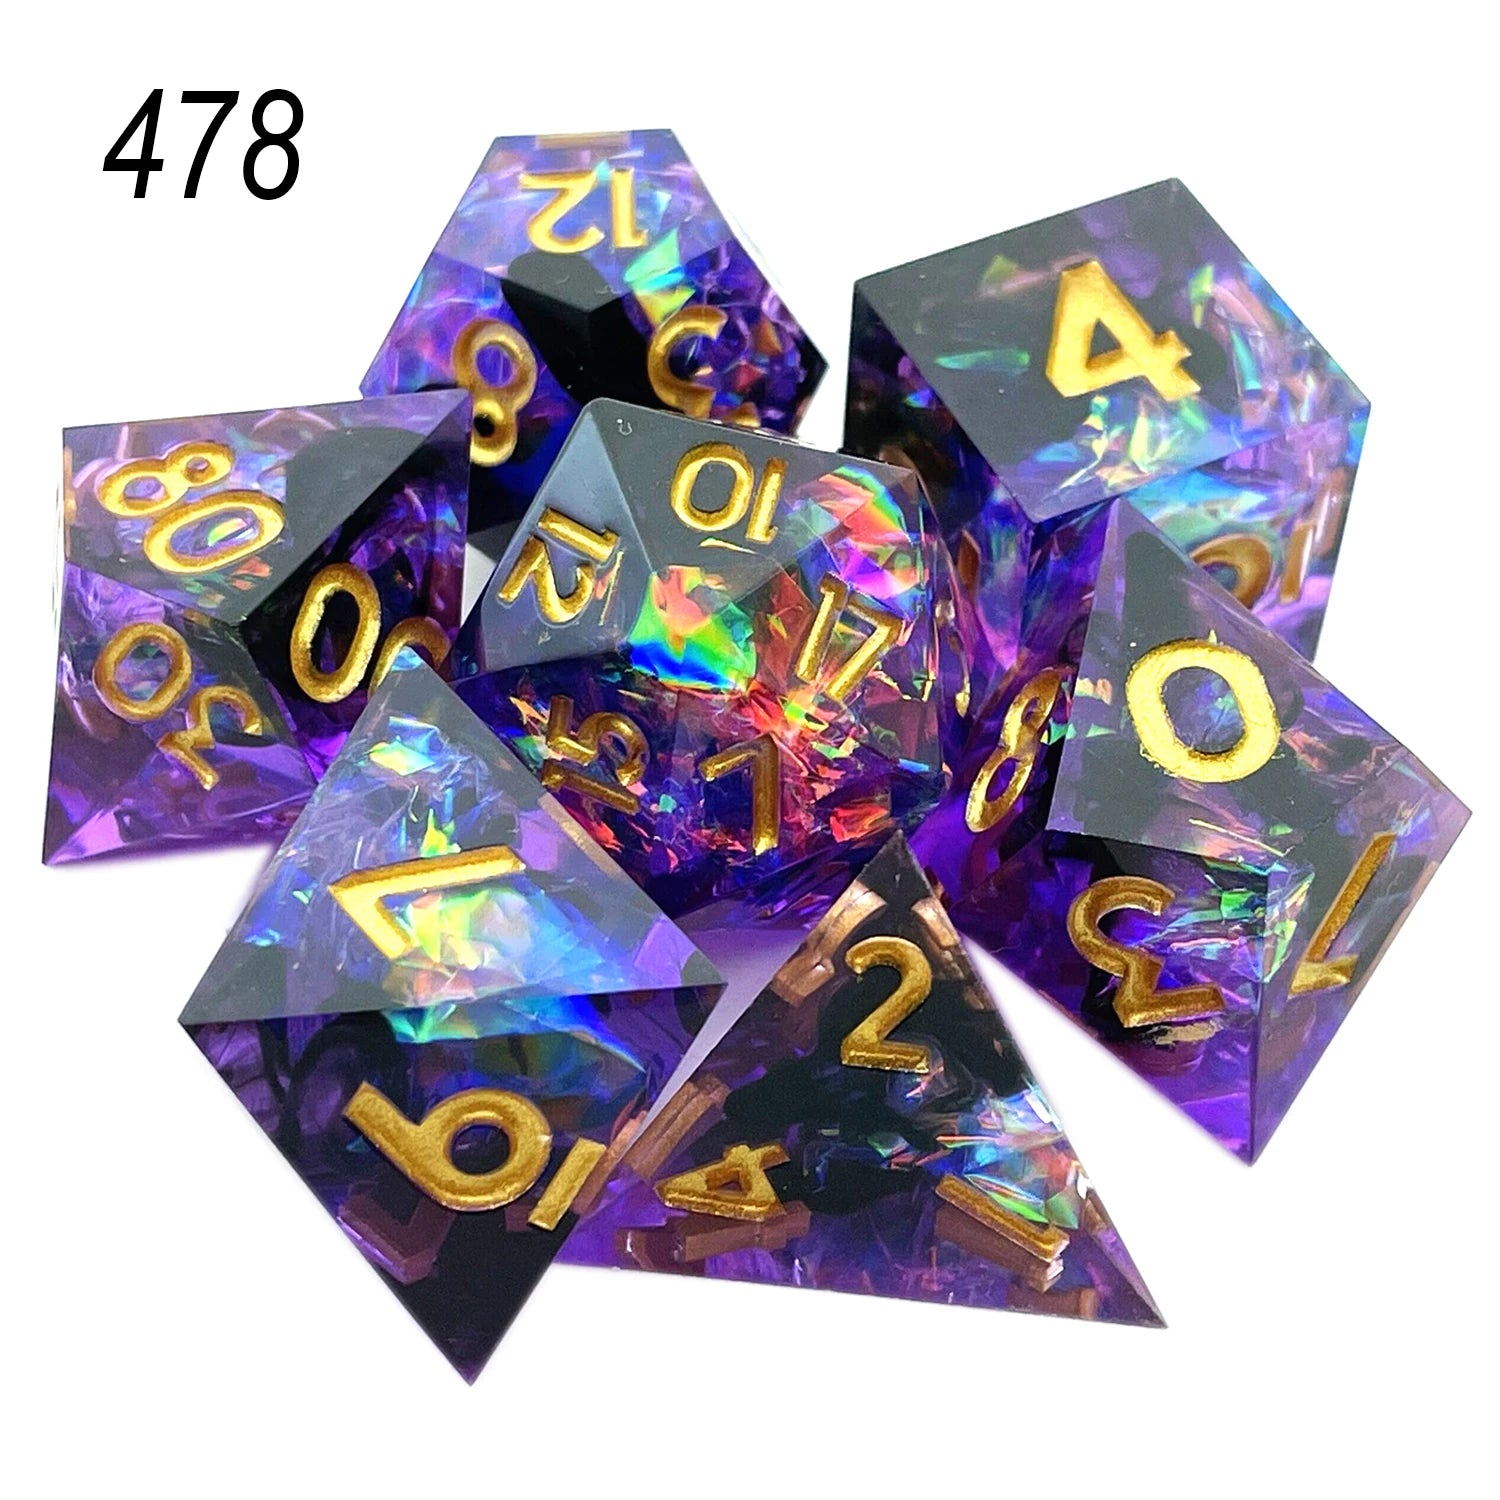 2023 Resin Dice 7PCs Dnd Set Solid Polyhedral D&D Dice DND For Role Playing Rpg Rol Pathfinder Board Game Dragon Scale Gifts 478